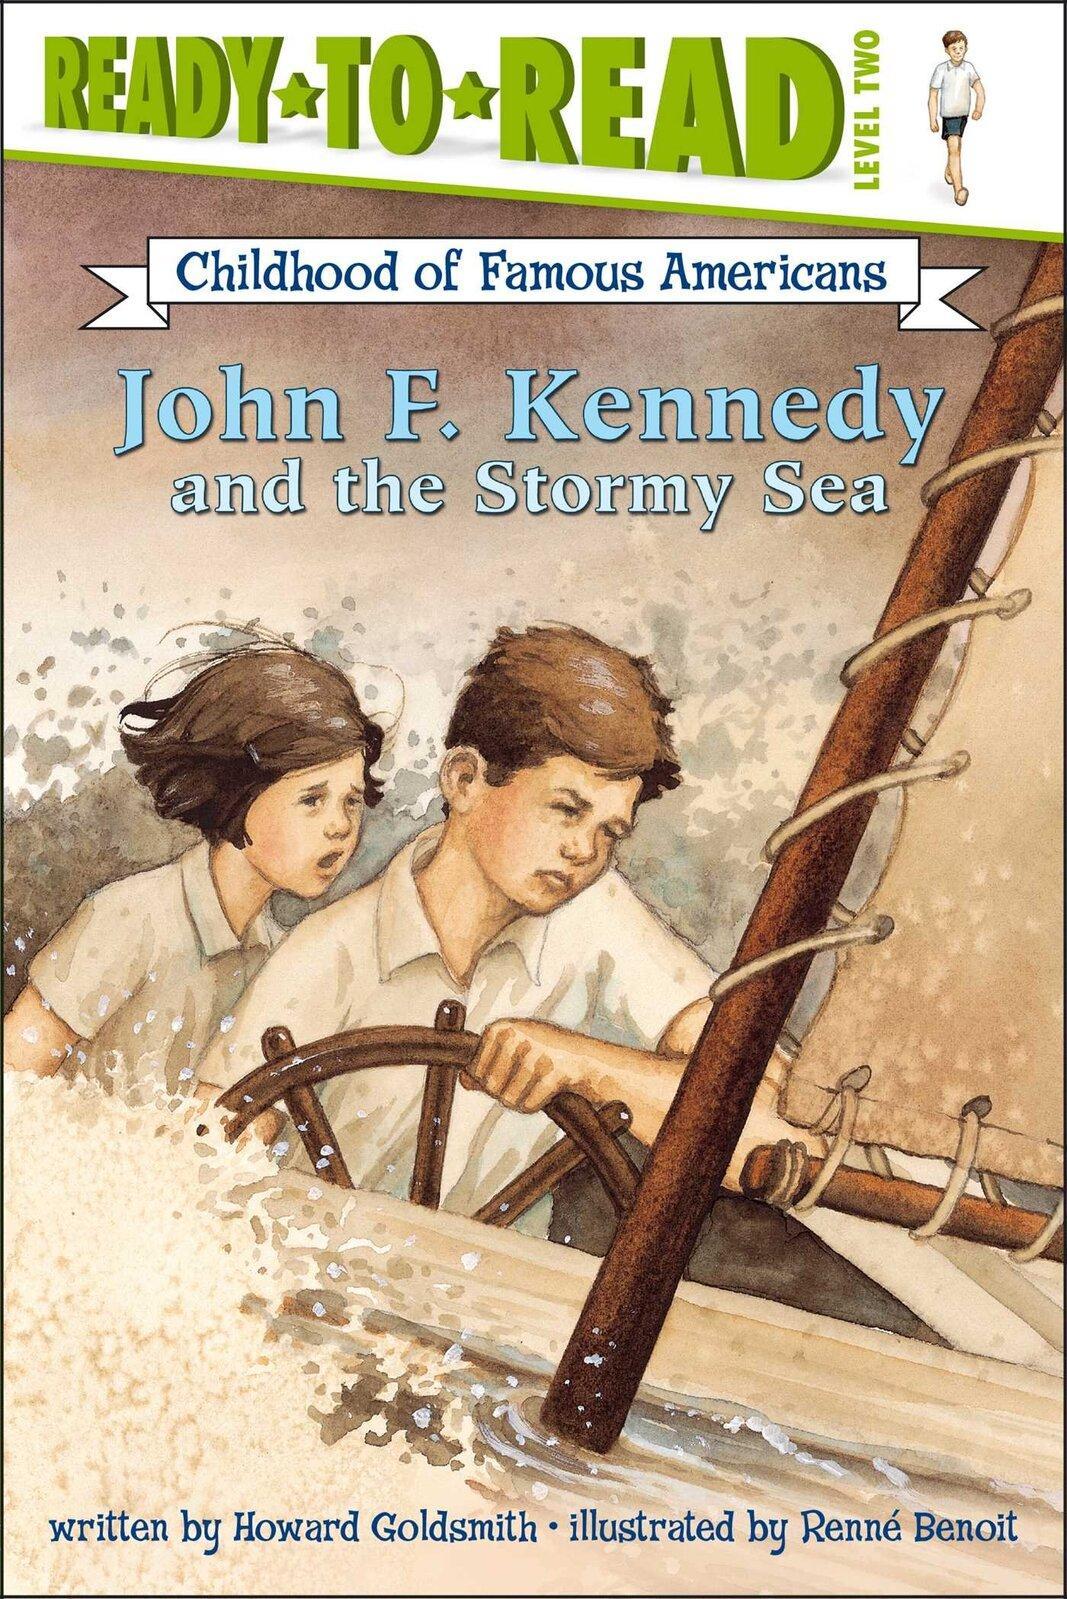 John F. Kennedy and the Stormy Sea (Ready-To-Read Childhood of Famous Americans - Level 2 Book